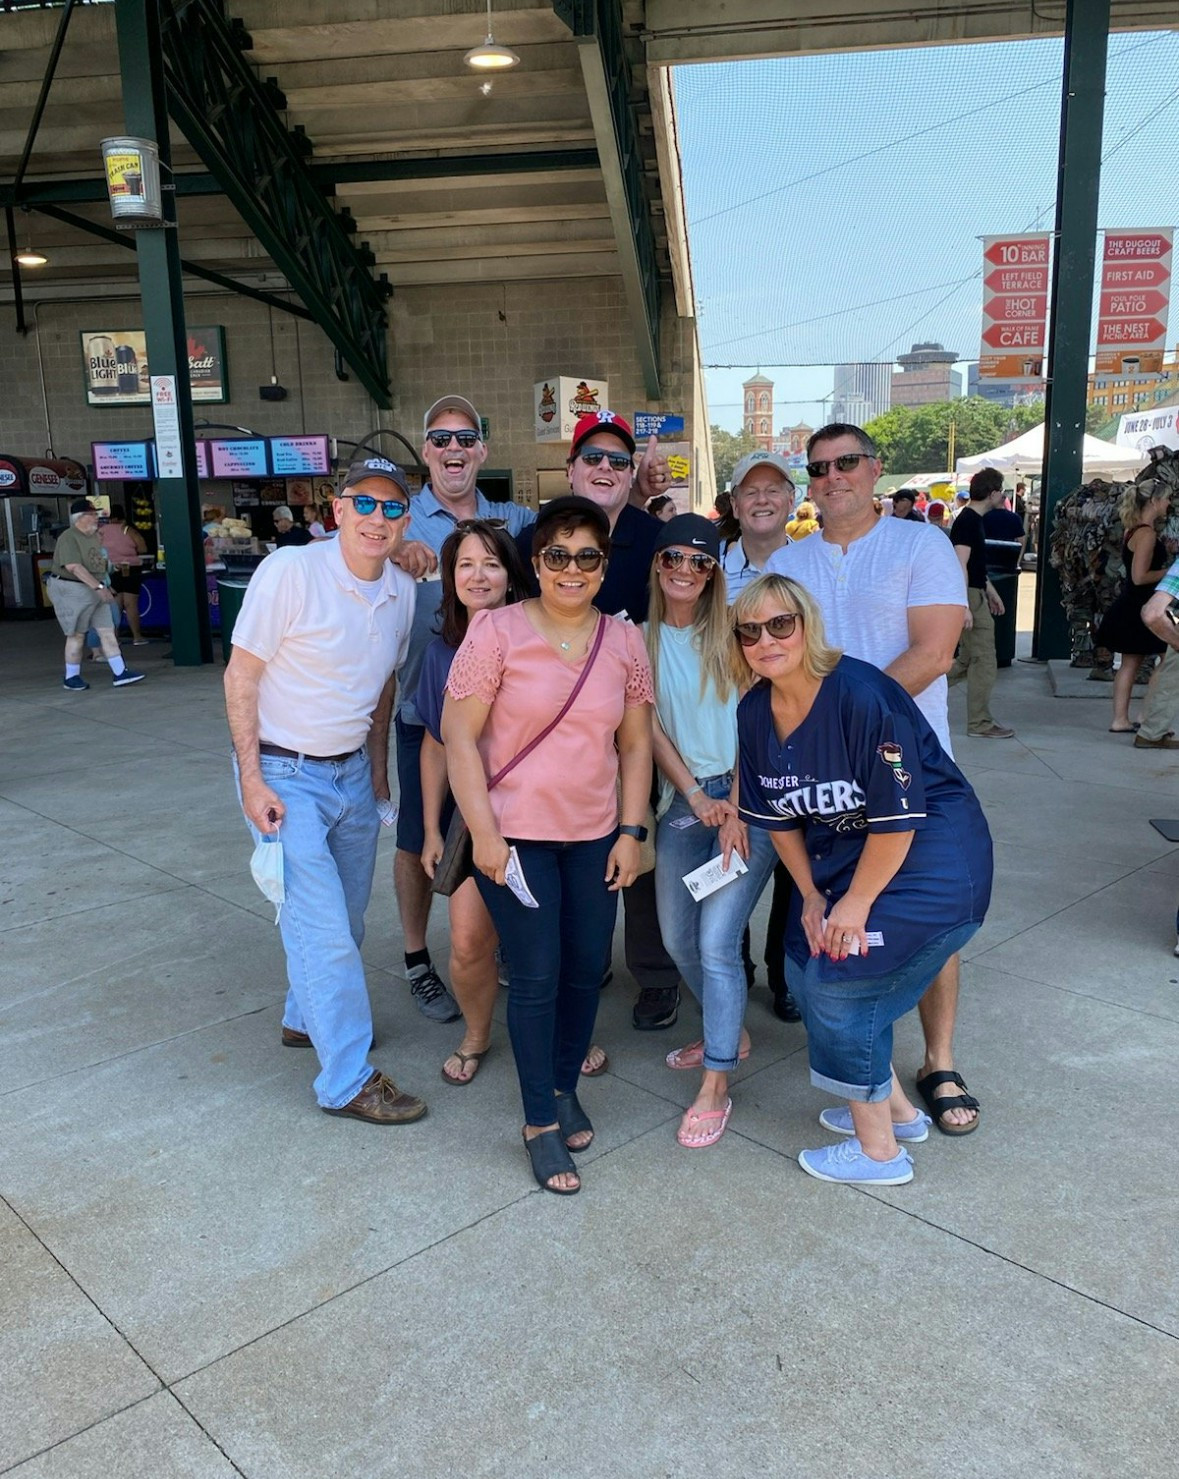 M&A employees at our annual Red Wings Baseball event to show our employee appreciation.